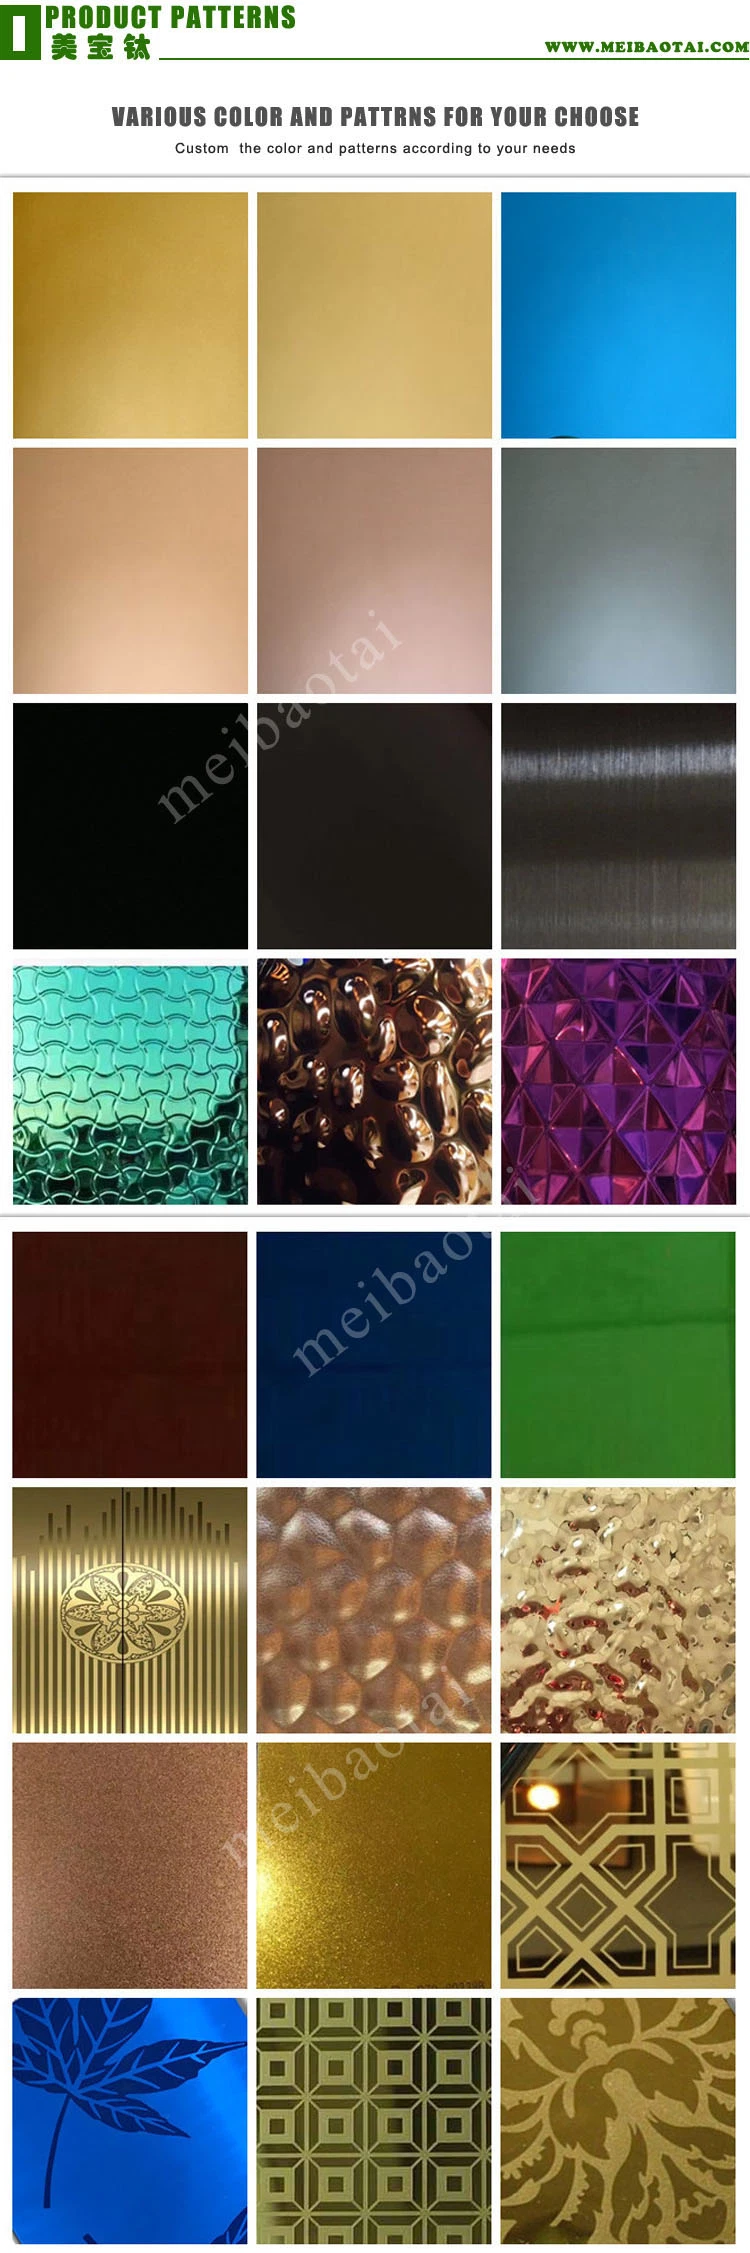 Black Mirror Finish Stainless Steel Sheets Decorative Stainless Steel Wall Panel Guangdong Hongwang Import and Export